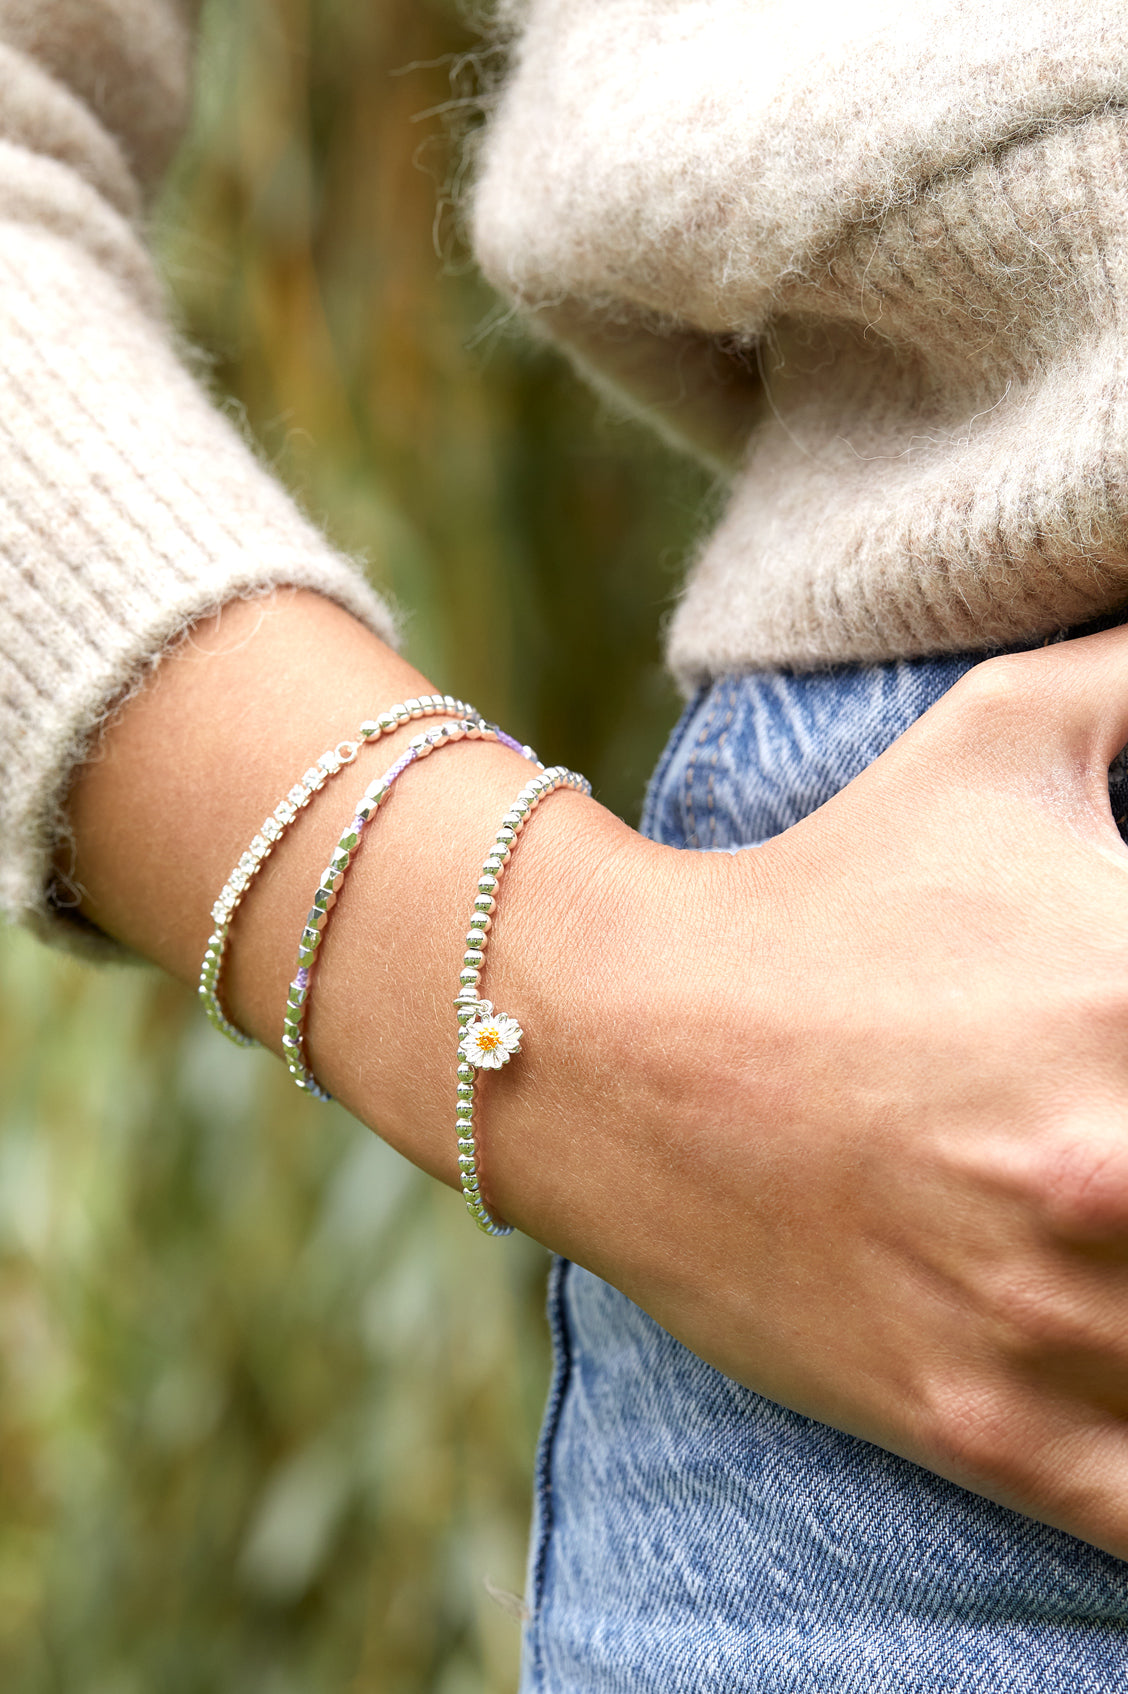 The best bracelets buy from independent British jewellery brands